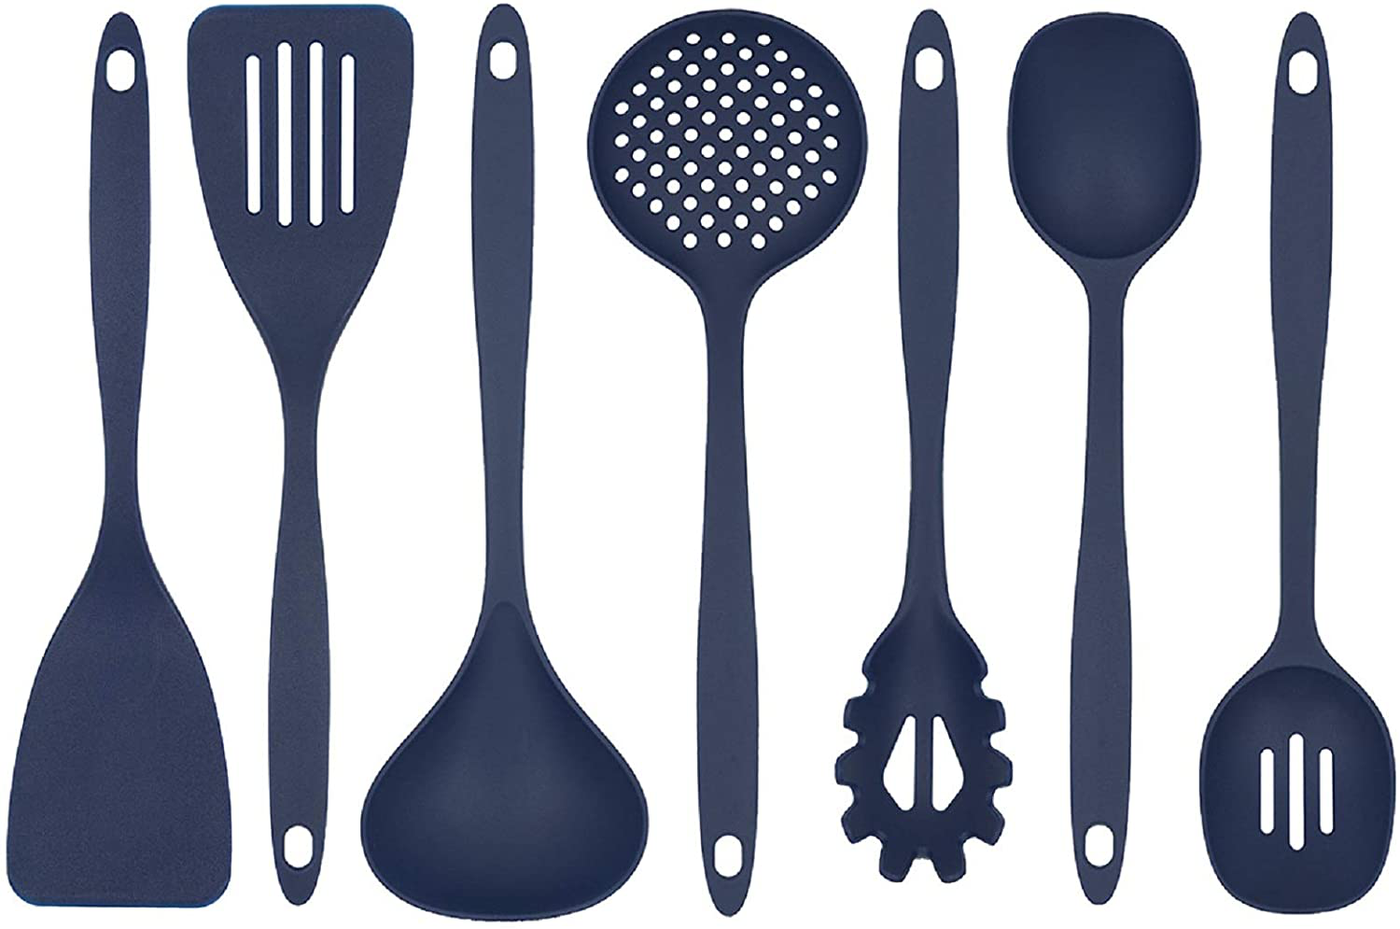 Glad Cooking Kitchen Utensils Set – 7 Pieces, Nylon Tools for Nonstick Cookware, Blue